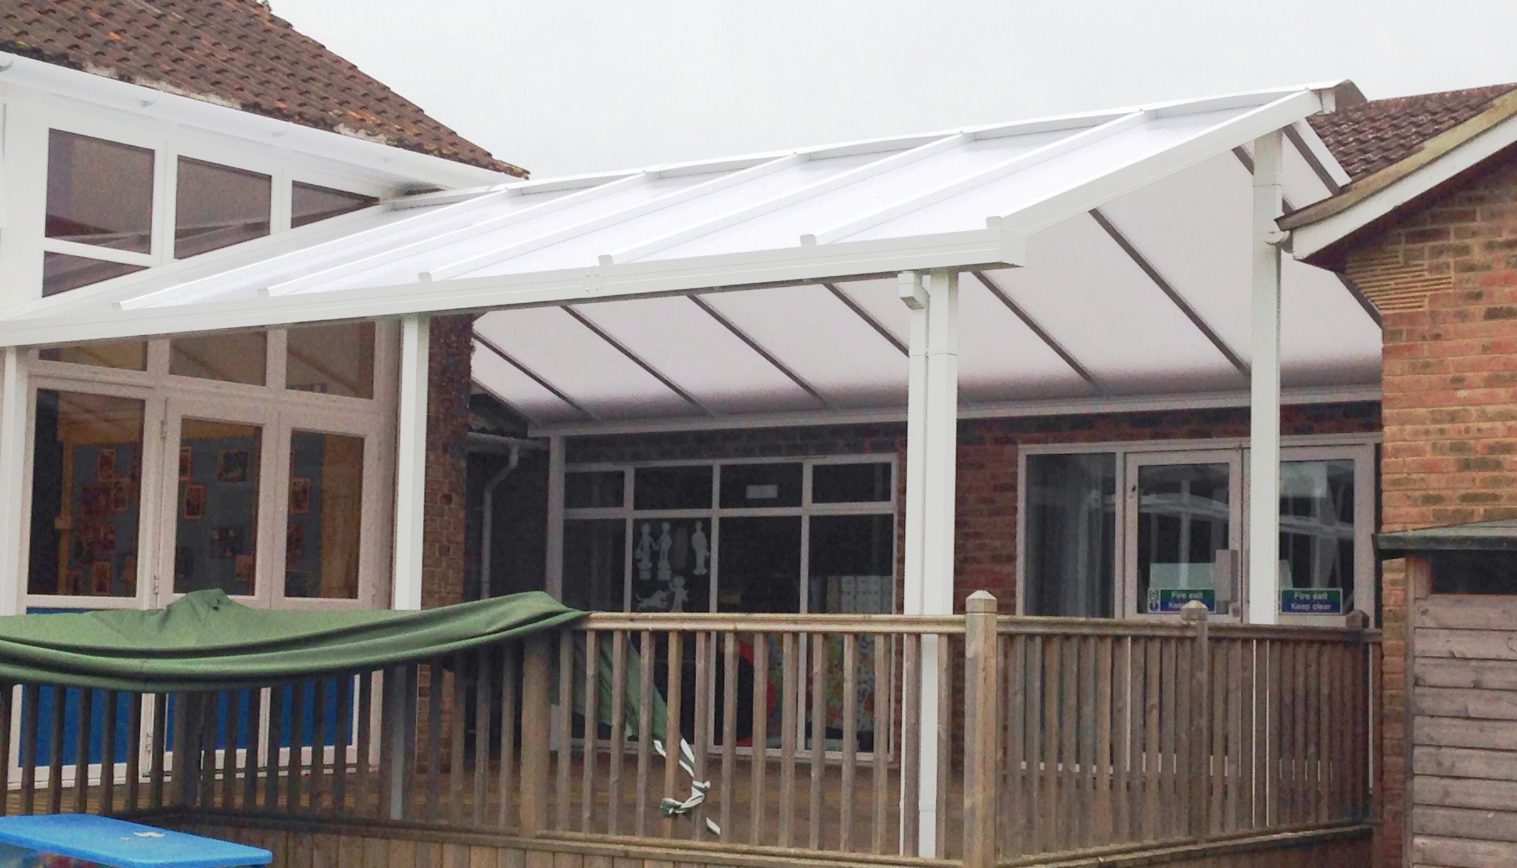 Sandy Lane Primary School – Wall Mounted Canopies